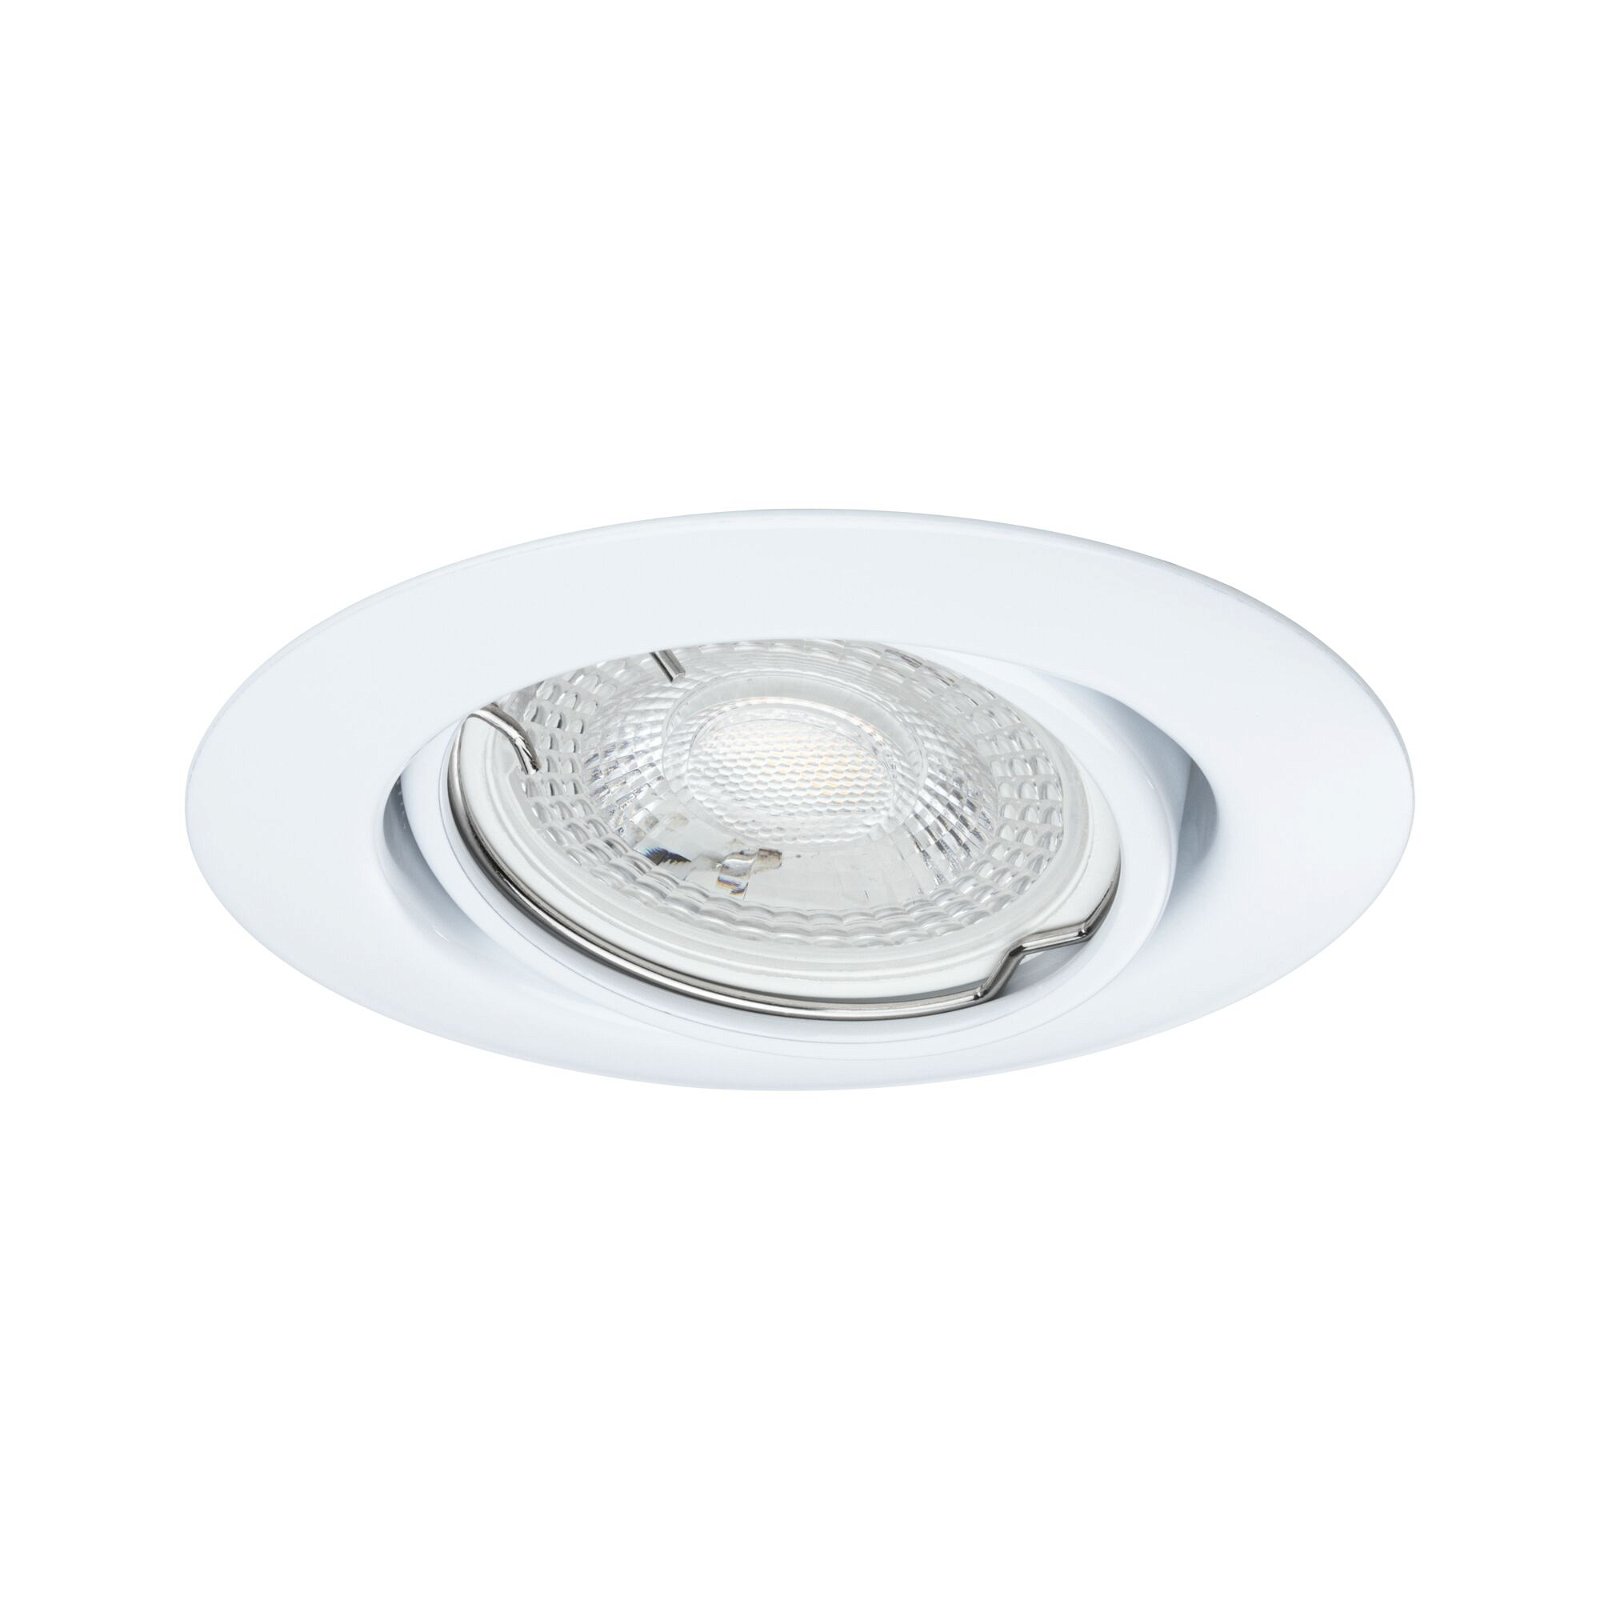 Recessed luminaire Base Basic Set Swivelling round 90mm 20° GU10 max. 10W 230V dimmable White